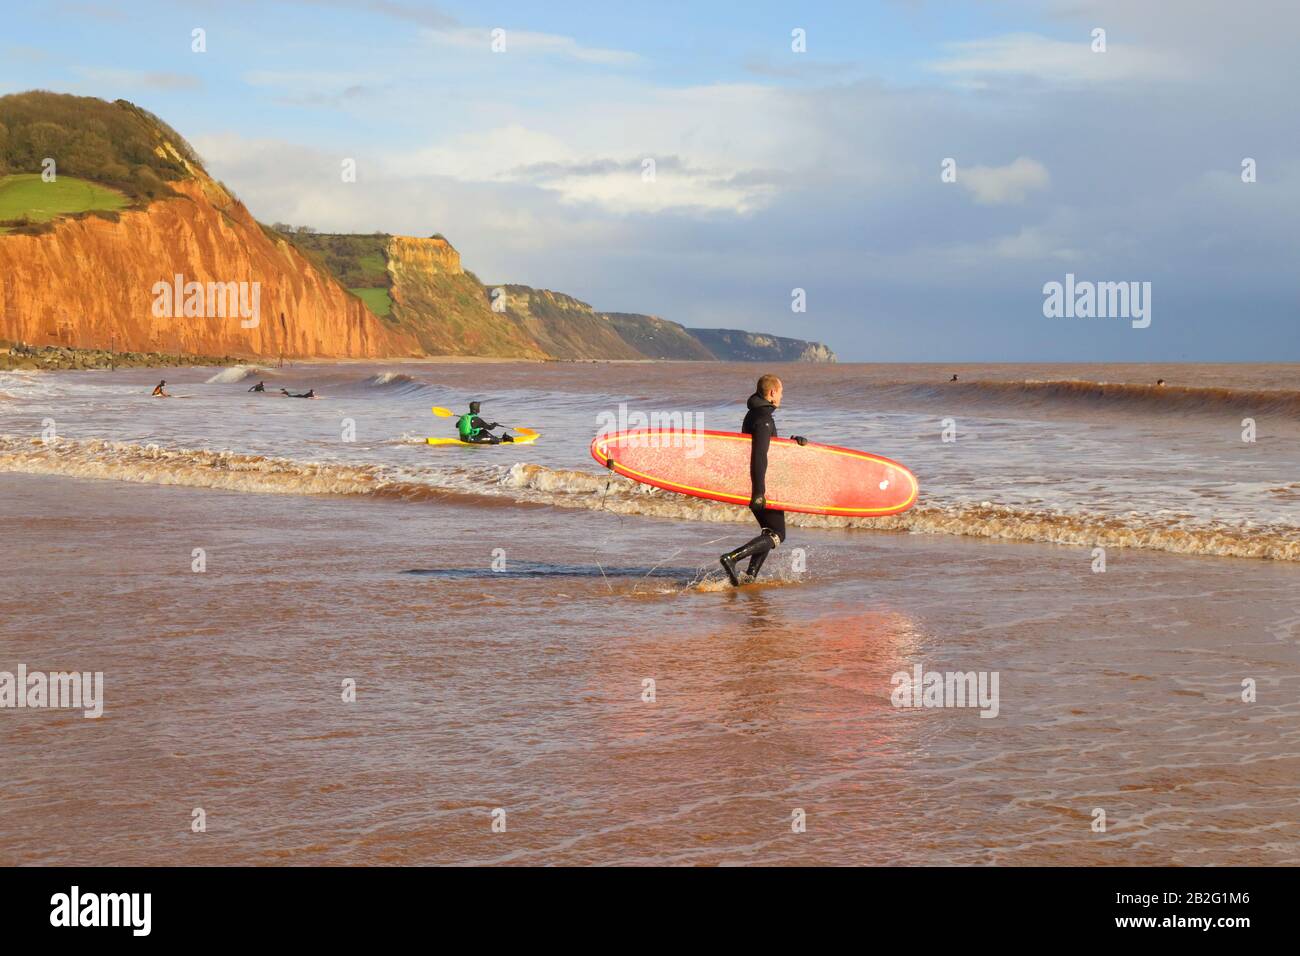 Surfer in wetsuit carrying surfboard on the beach in Sidmouth, Devon Stock Photo